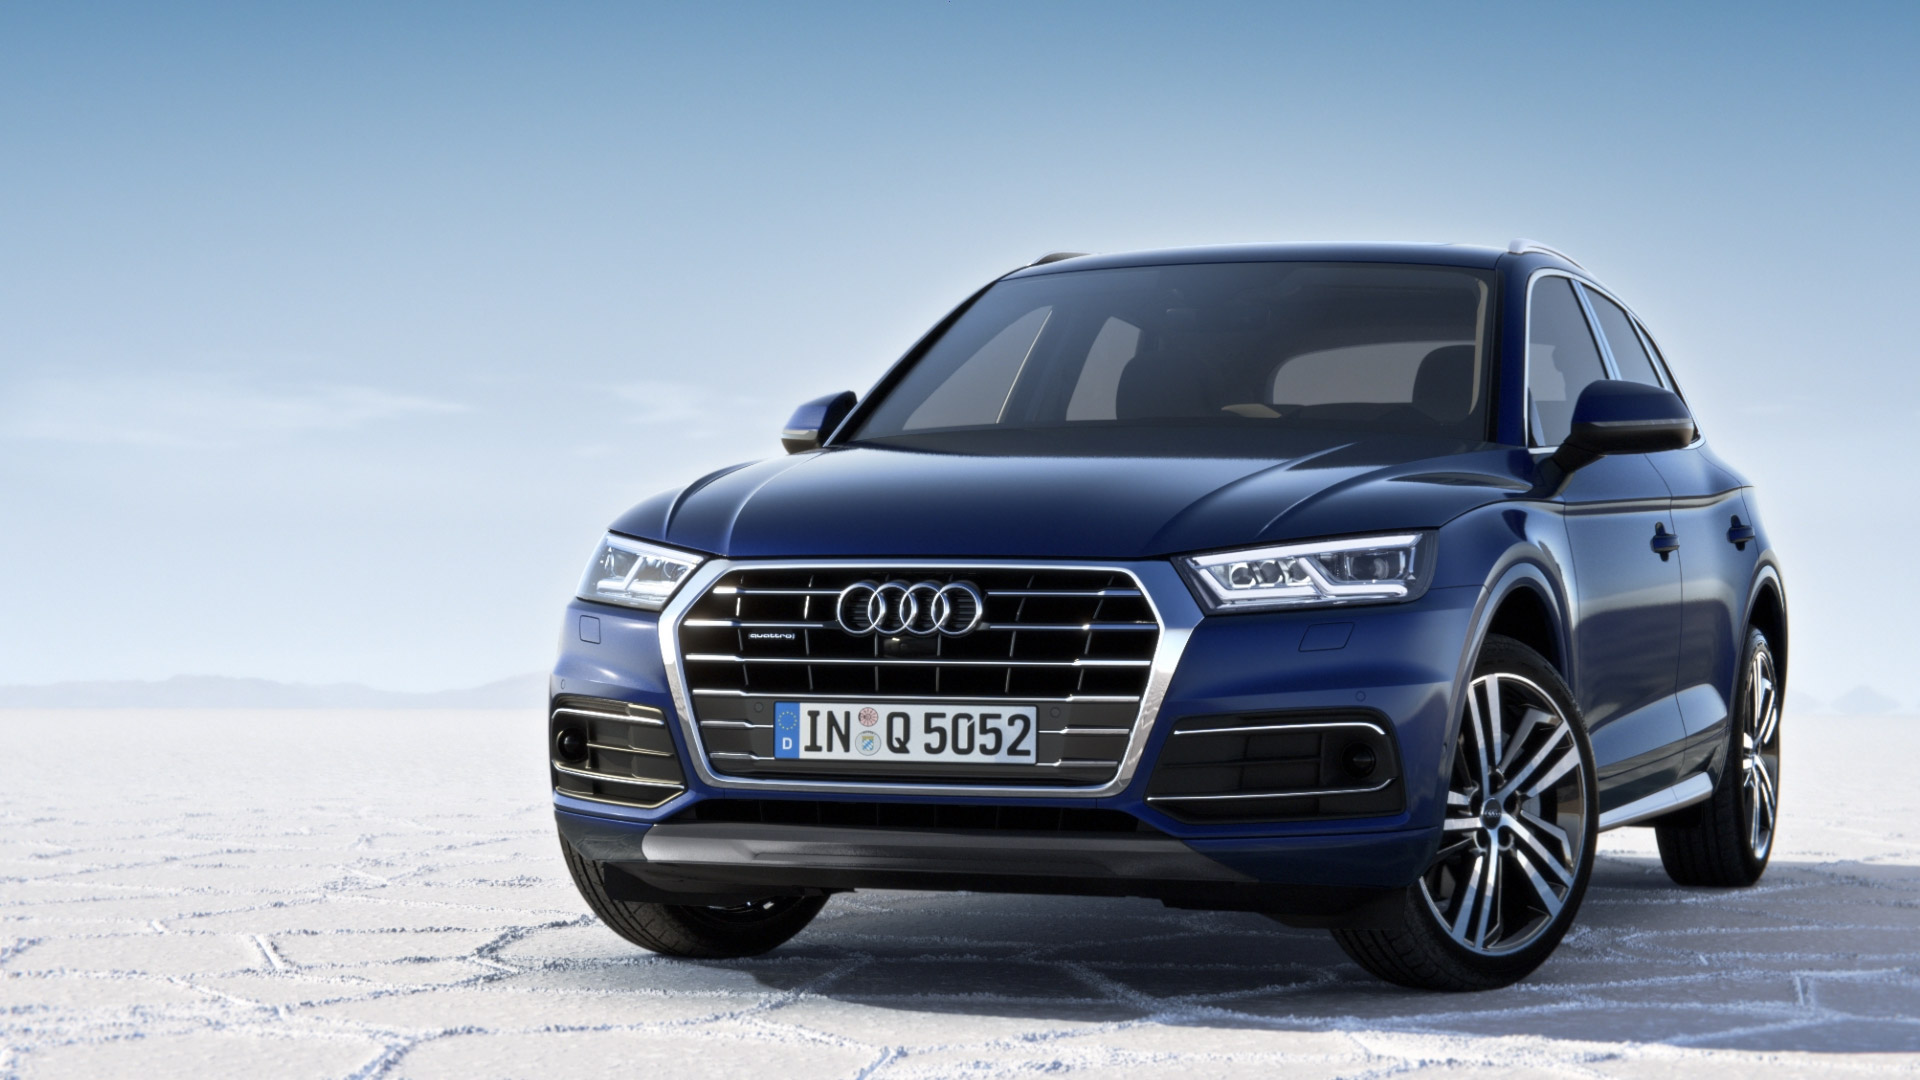 Top 5 Reasons to Buy a 2019 Audi Q5